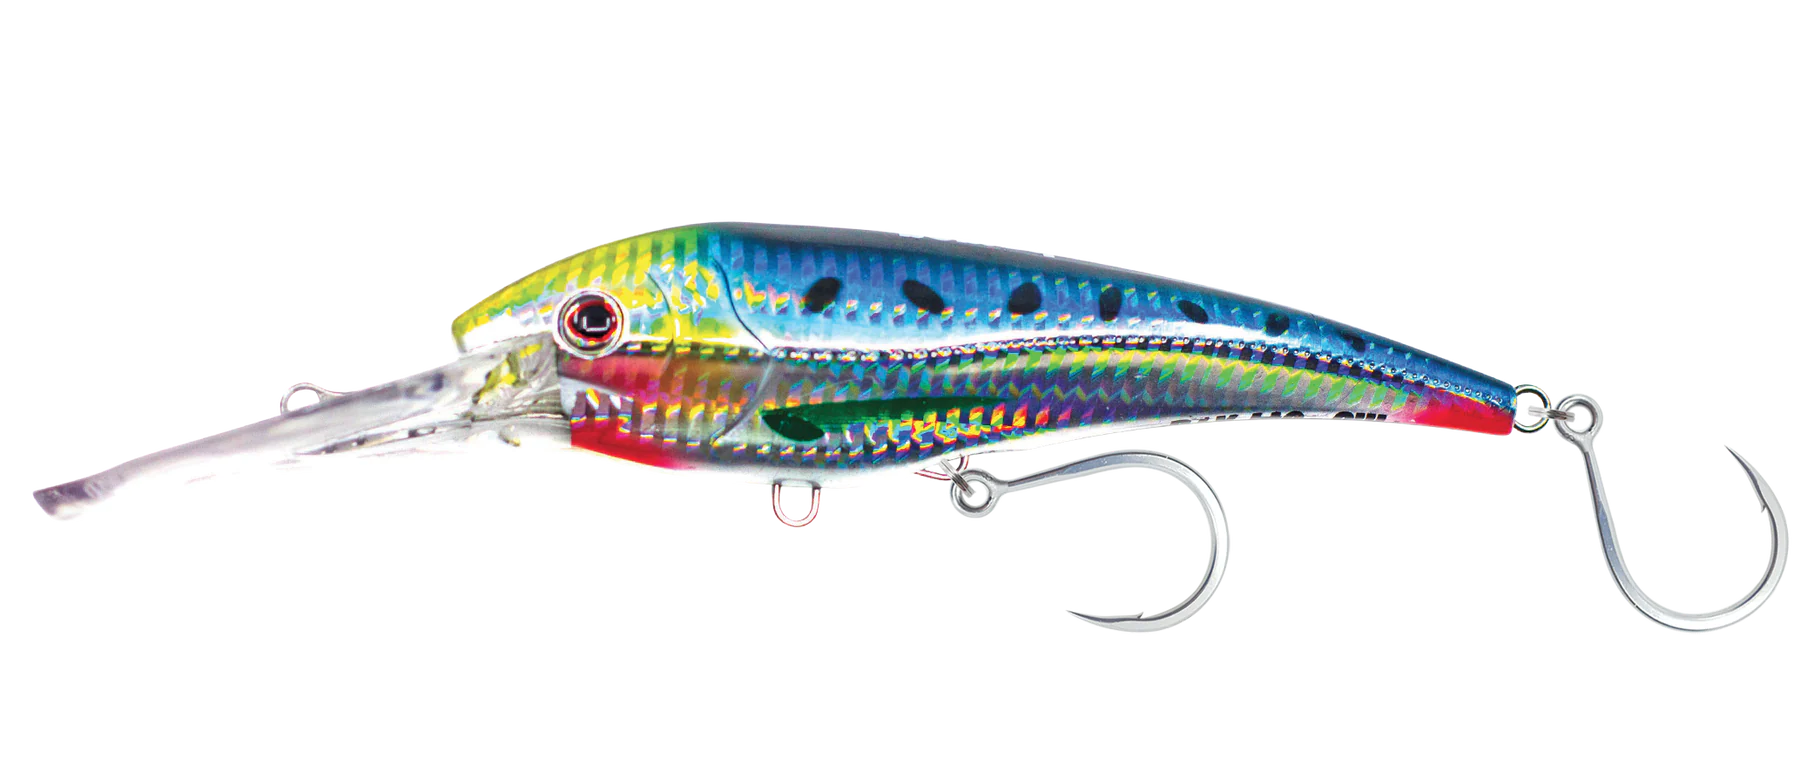 Trolling Lure - Nomad DTX Minnow 200MM/40ft